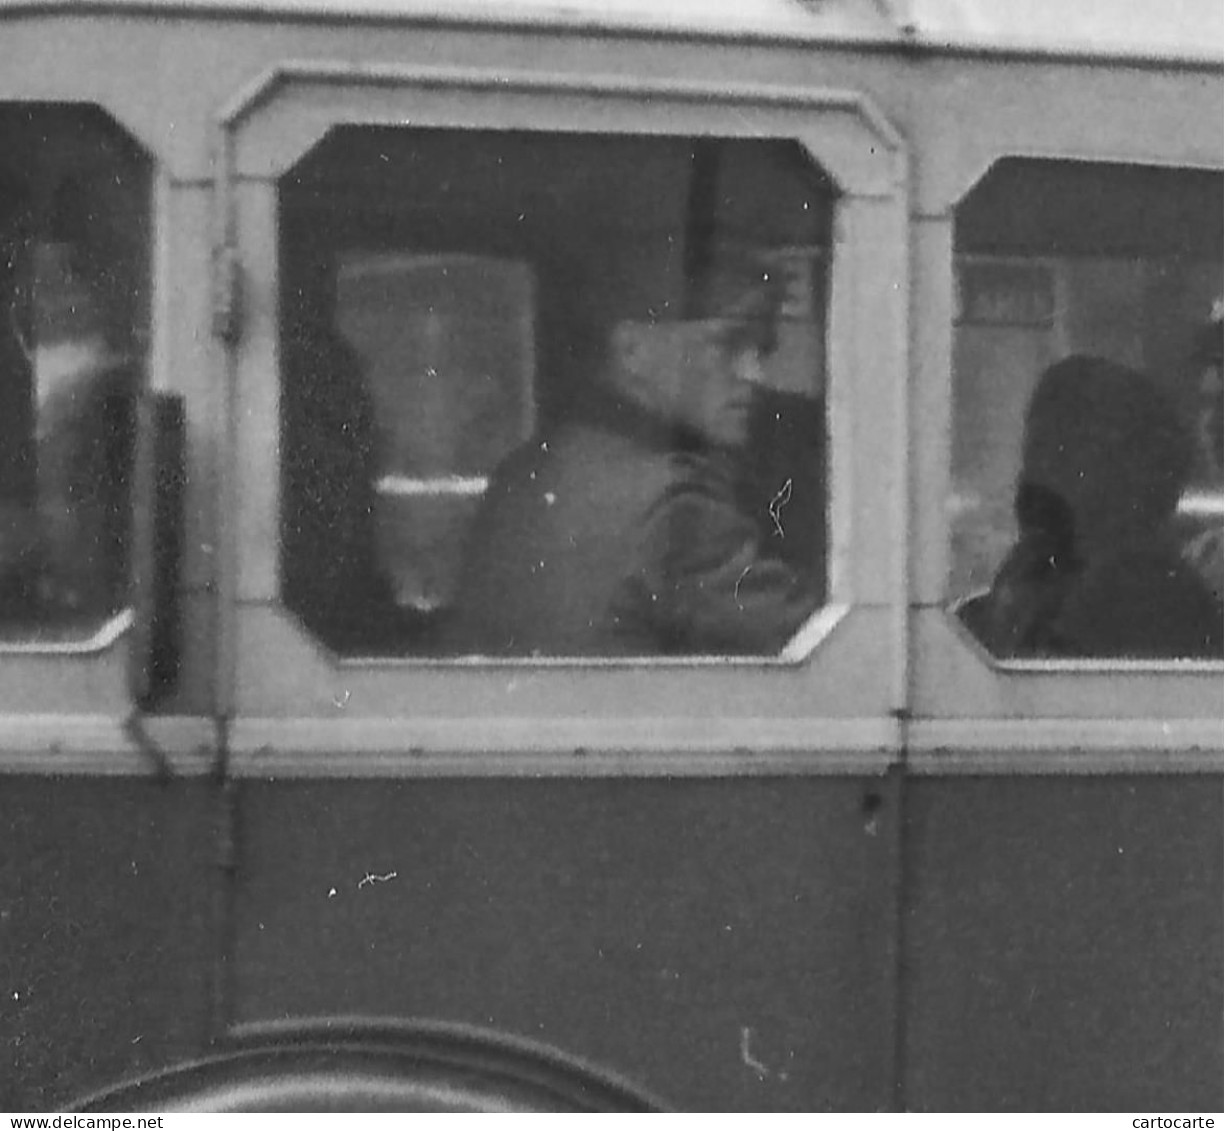 29 027 0524 WW2 WK2 FINISTERE BREST OCCUPATION CAFE RESTAURANT CONTI DEPART AUTOBUS  1940 - War, Military